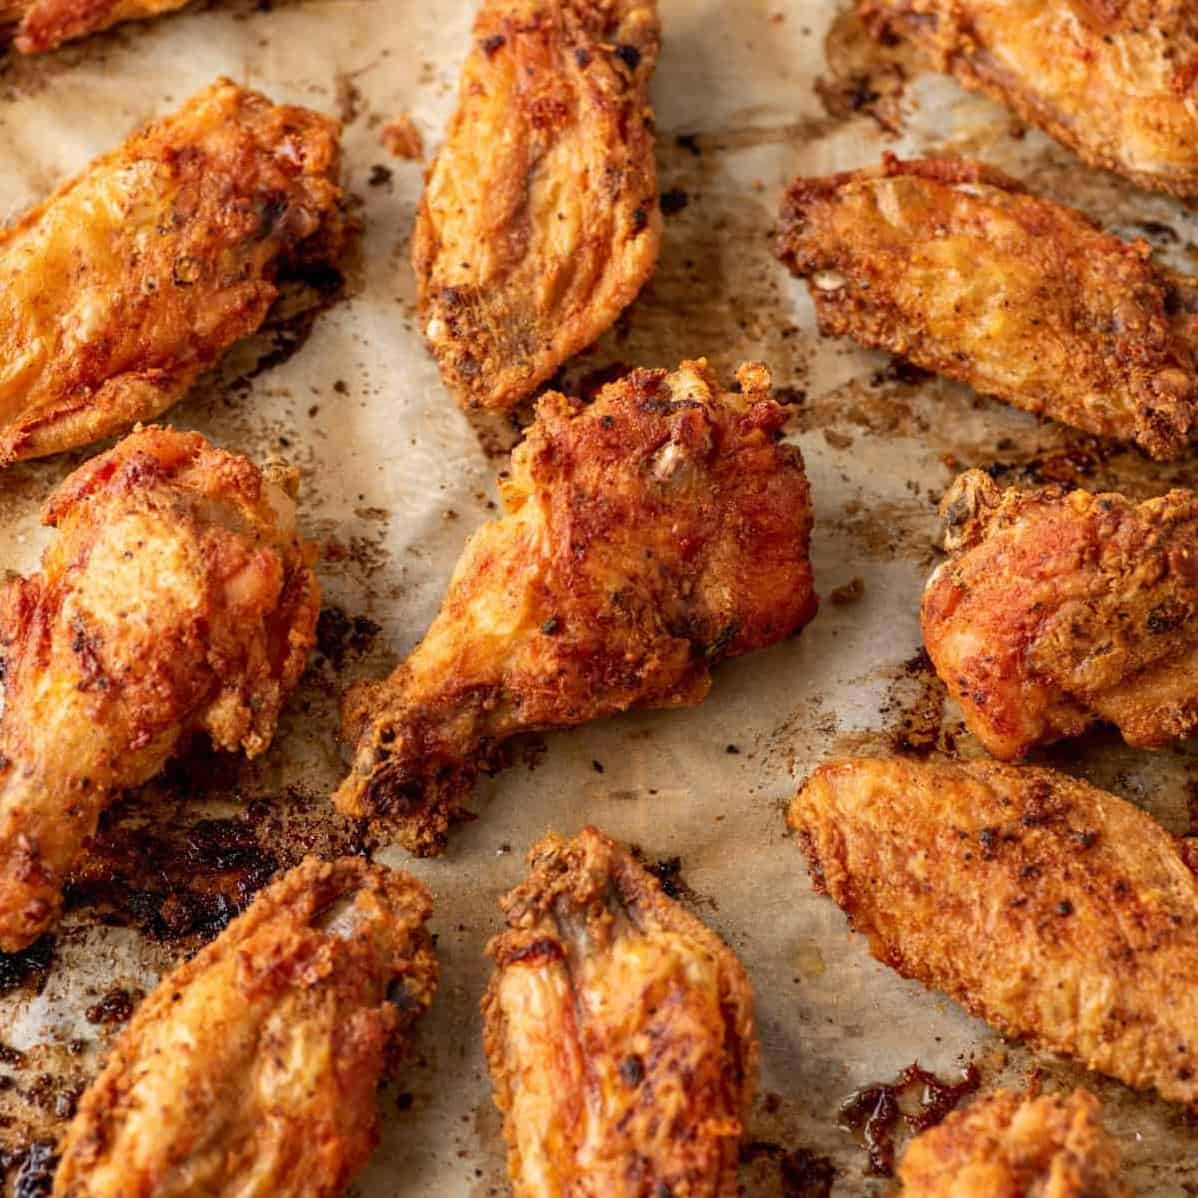  Don't forget the dipping sauce, it's the perfect complement to these delicious wings.